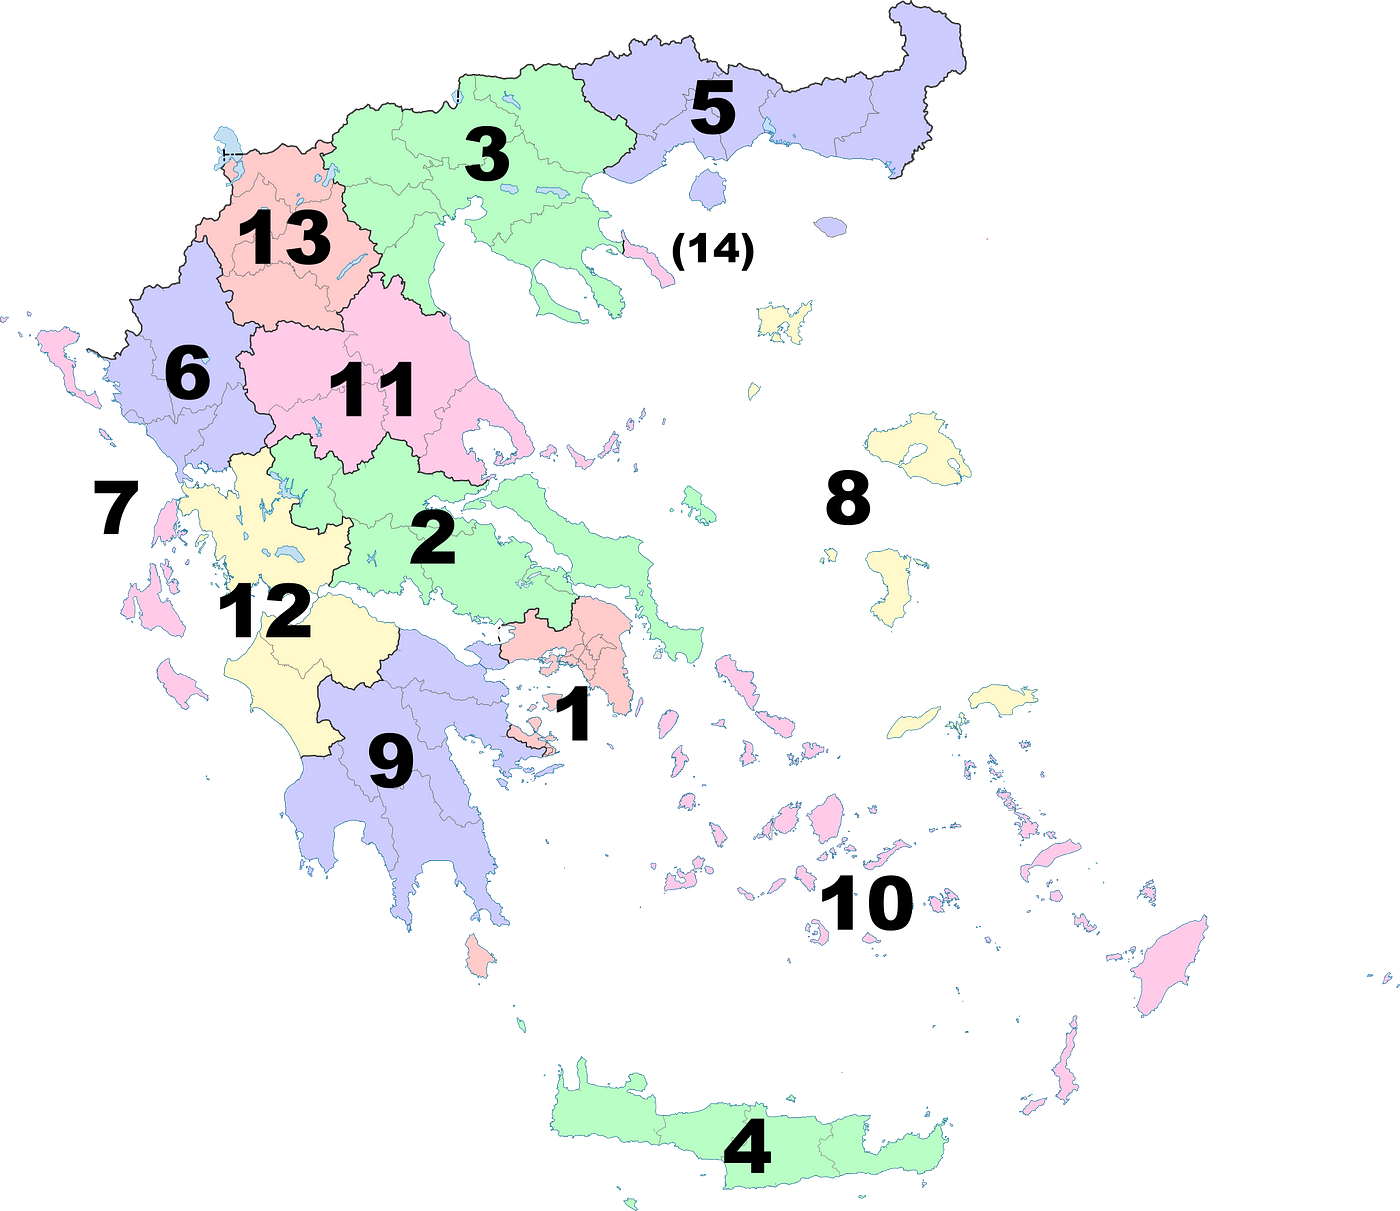 Map of Greece by Philly boy92 (CC BY-SA 3.0) via Wikimedia Commons